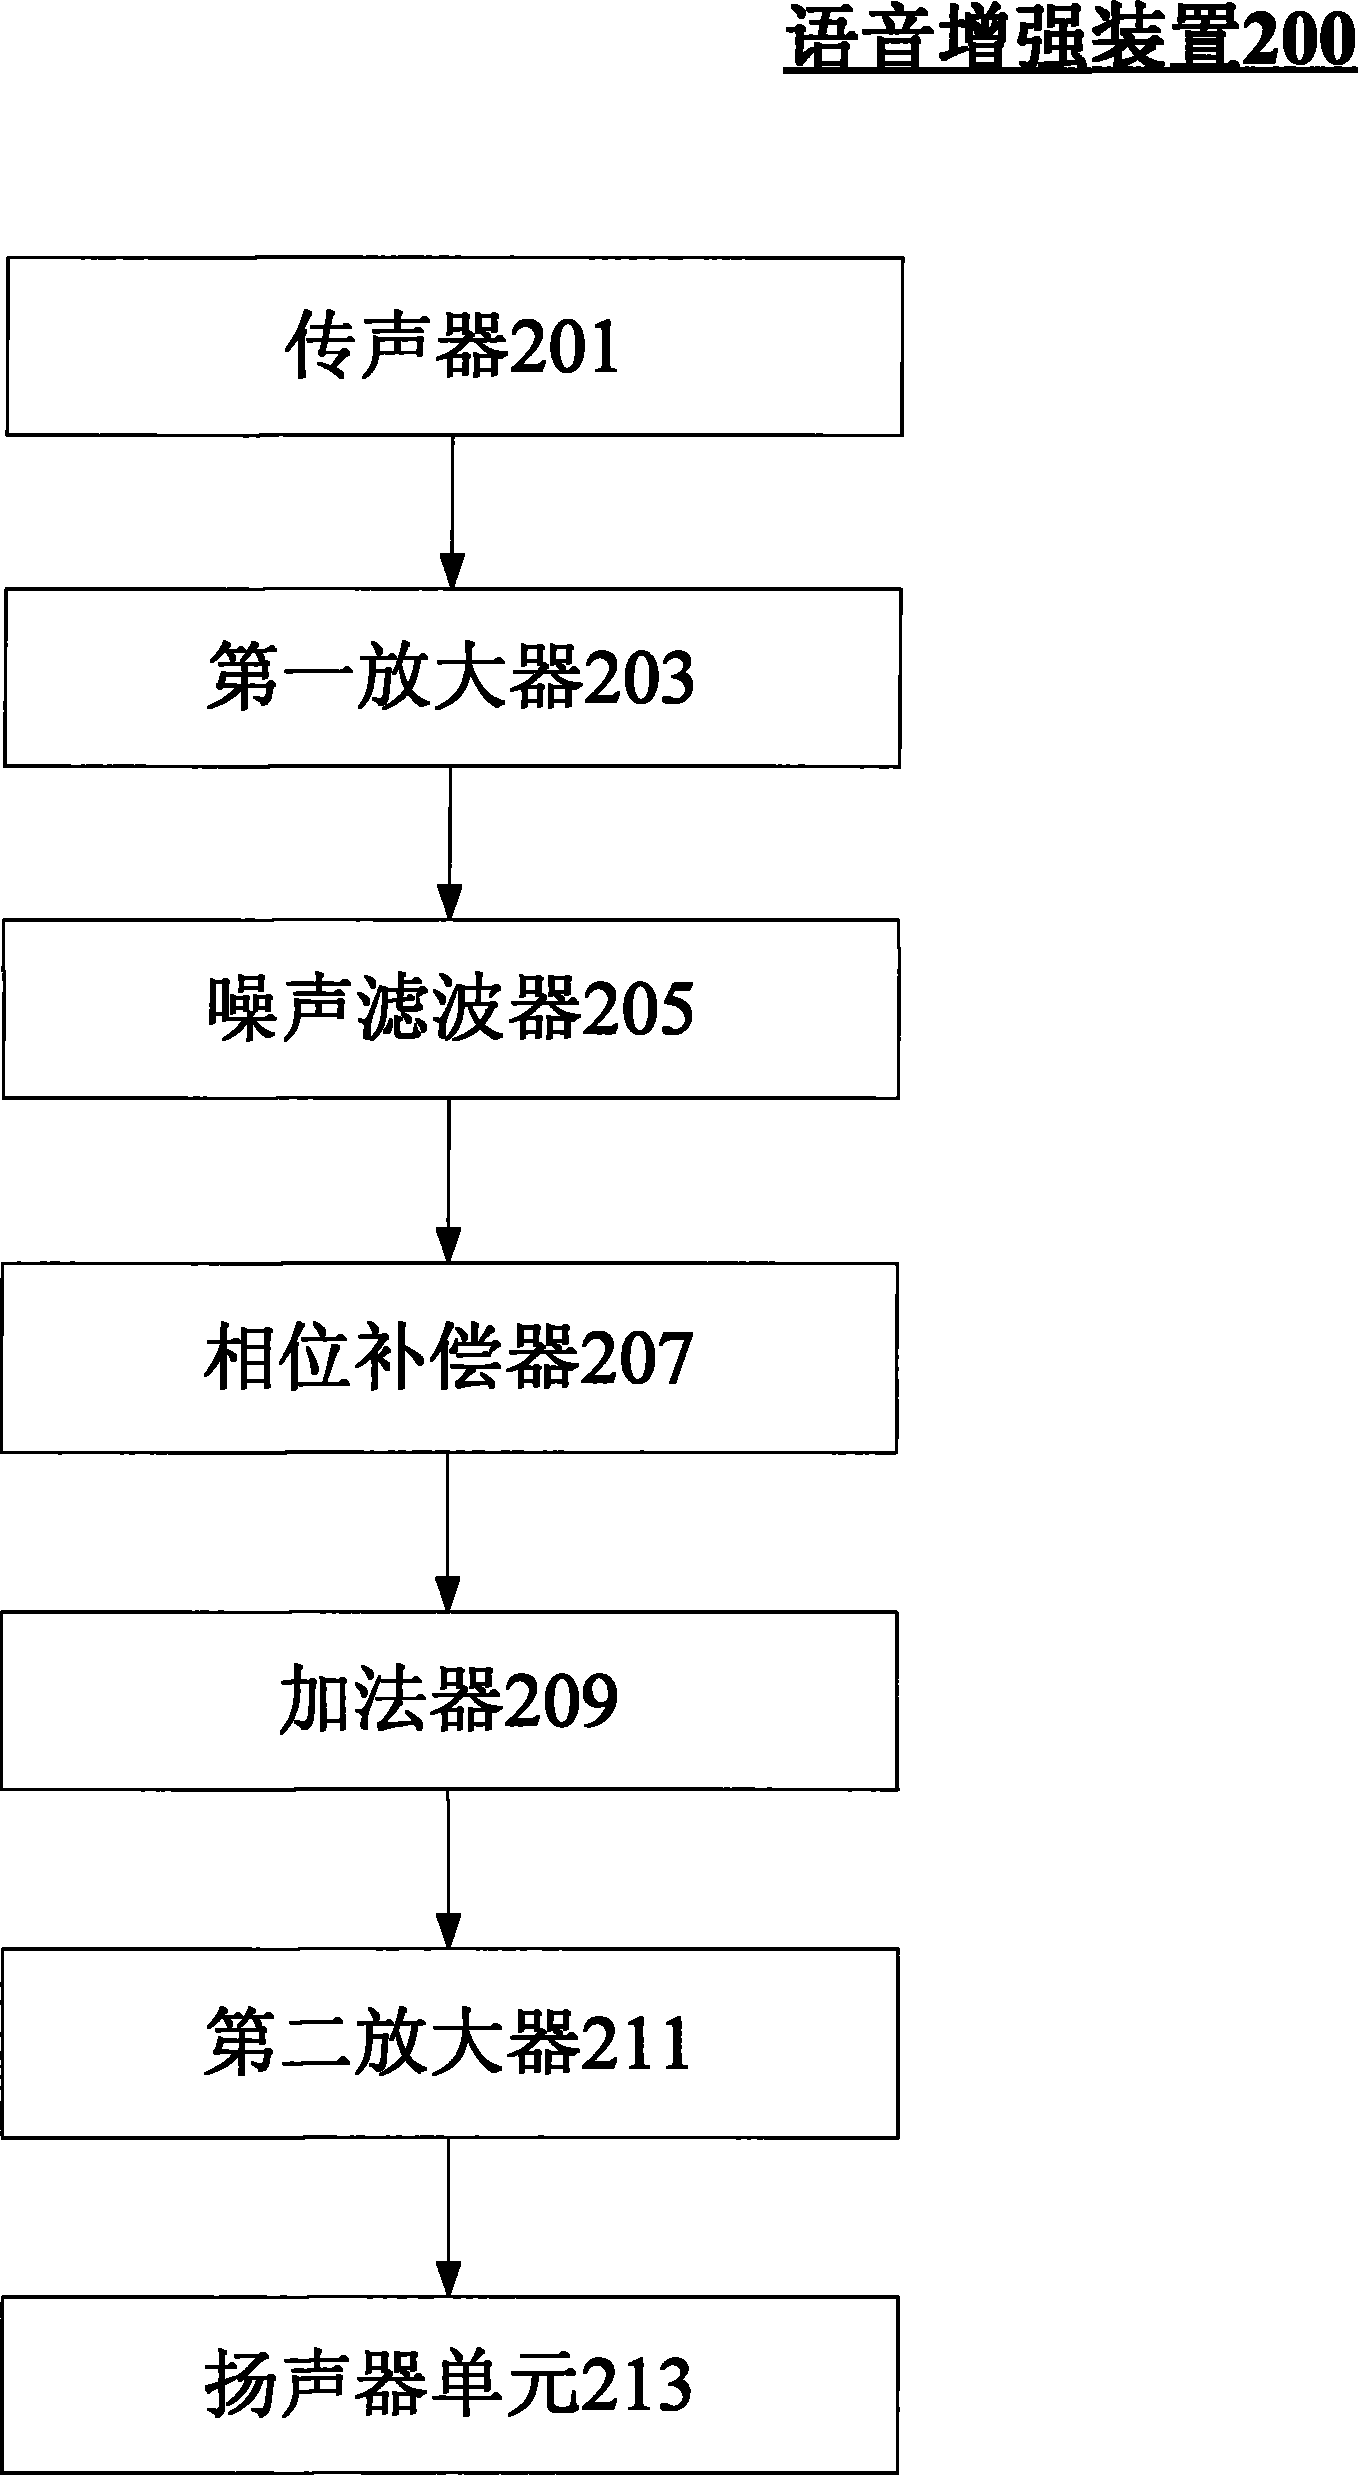 Unsealed earplug-type headset, and device and method for enhancing voice of receiving end